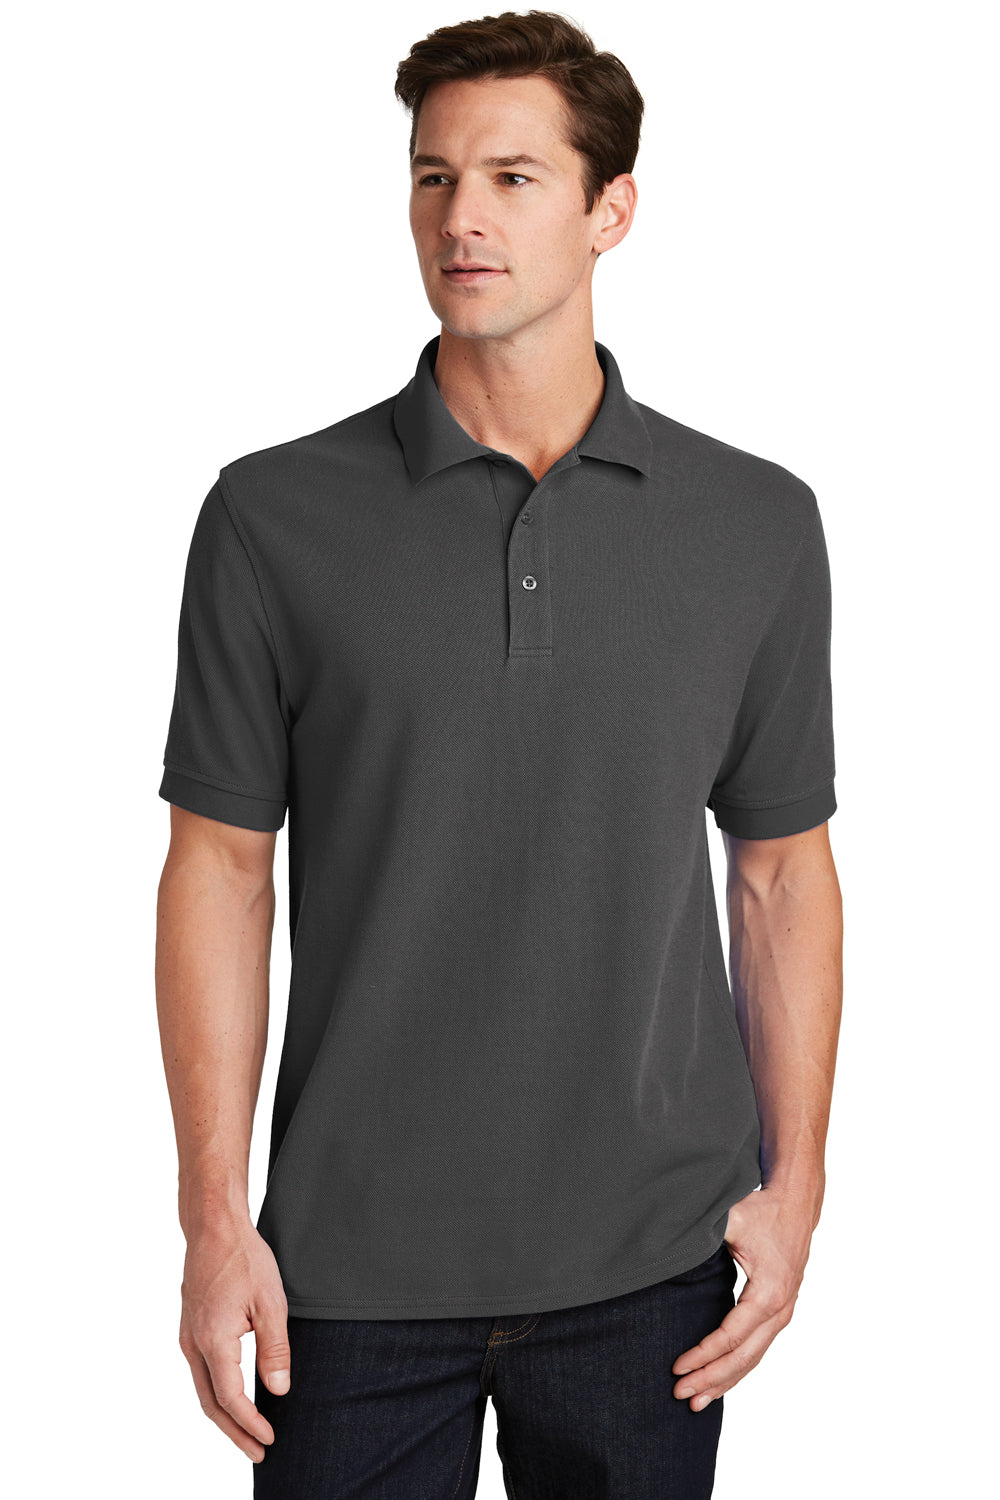 Port & Company KP1500 Mens Stain Resistant Short Sleeve Polo Shirt Charcoal Grey Front